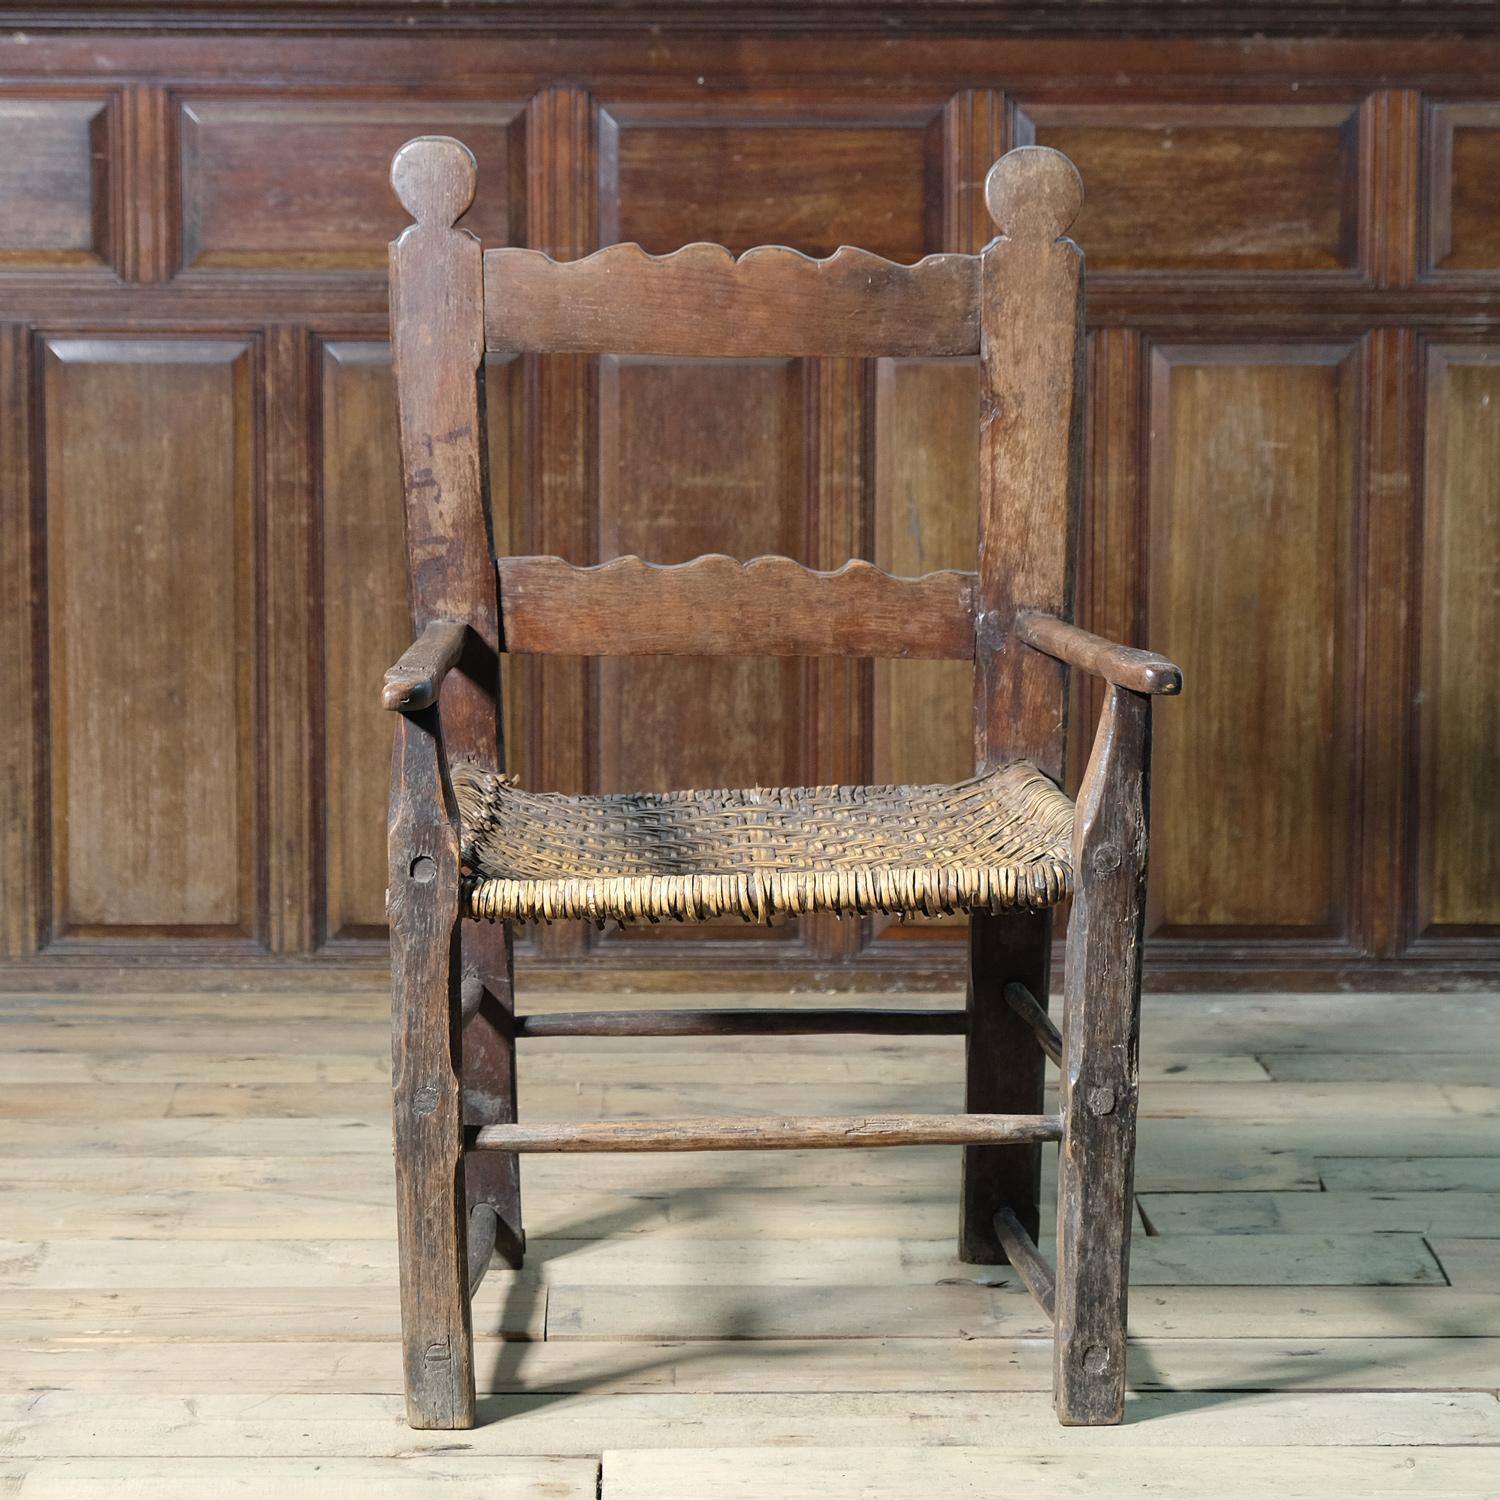 Hand-Carved Rustic European Folk Art Chair, Vernacular and Primitive, Woven Seat